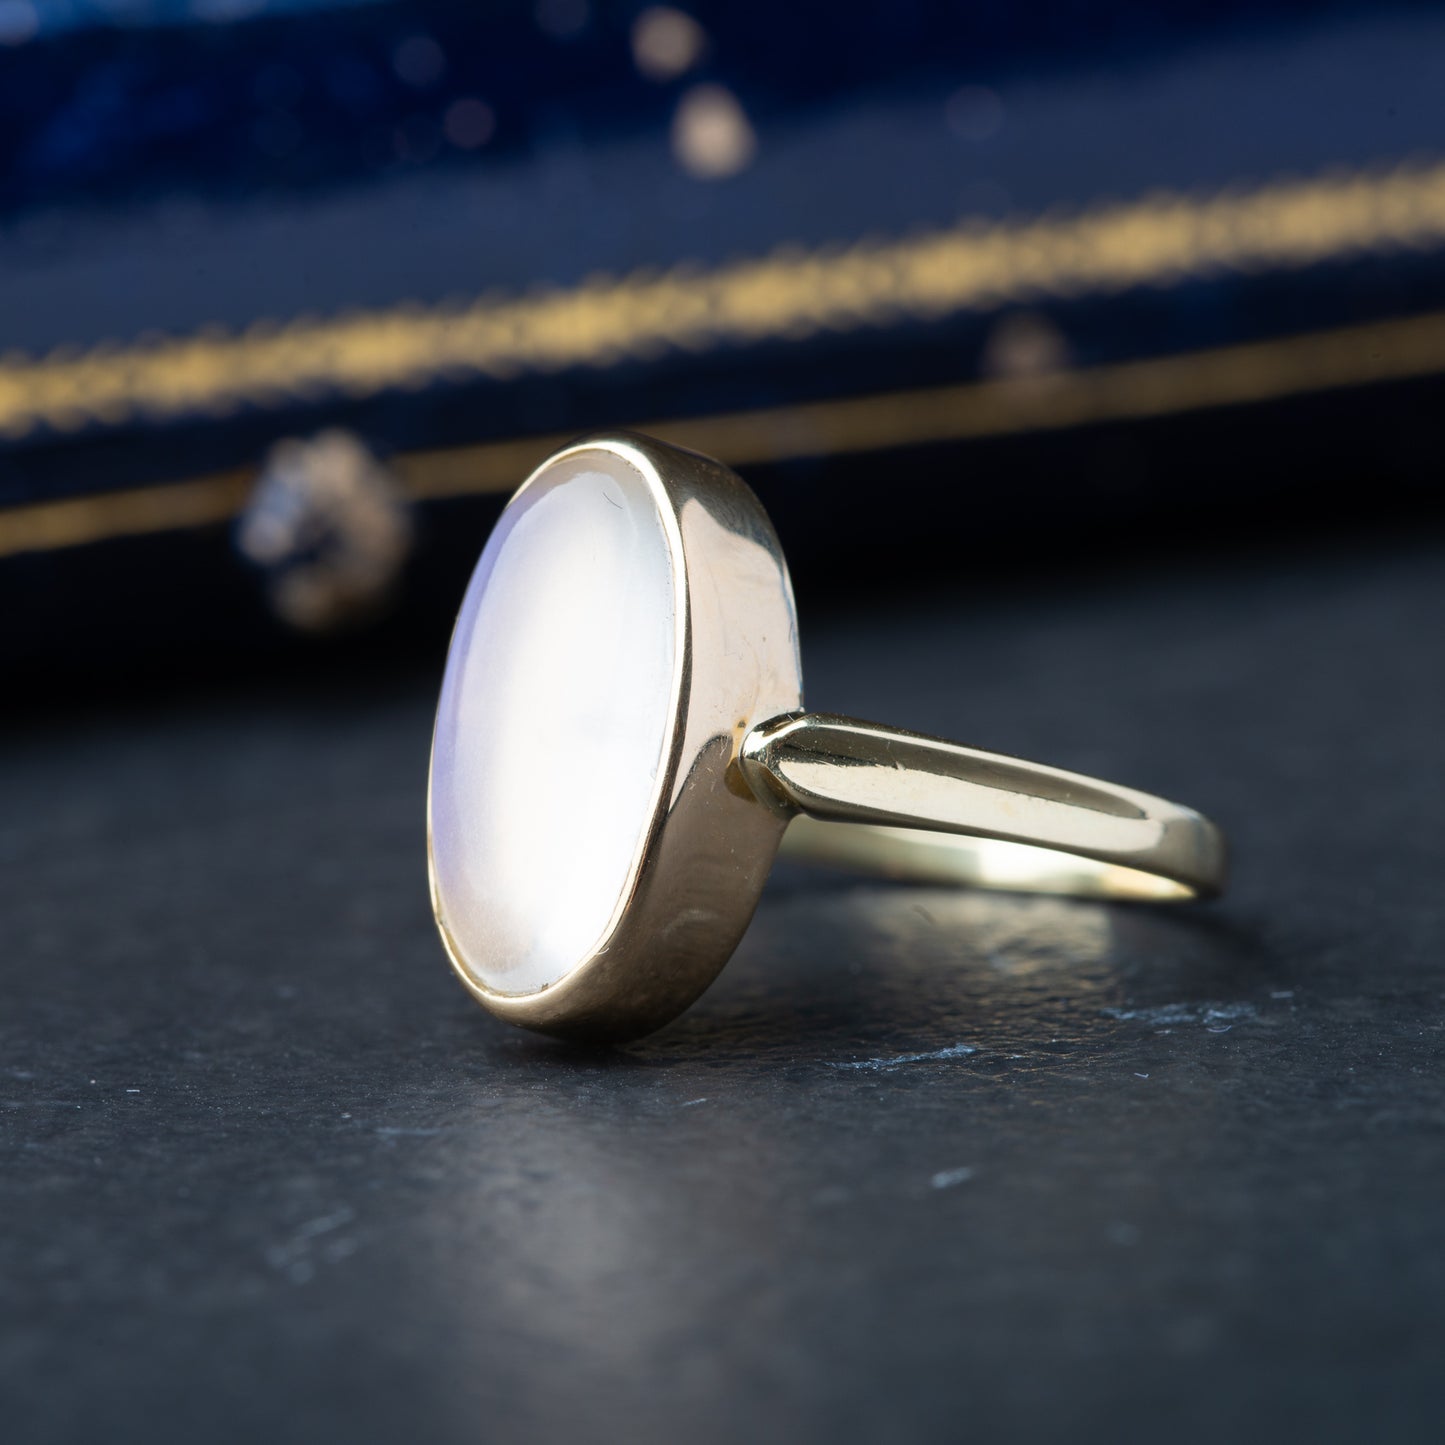 New-made Moonstone Ring